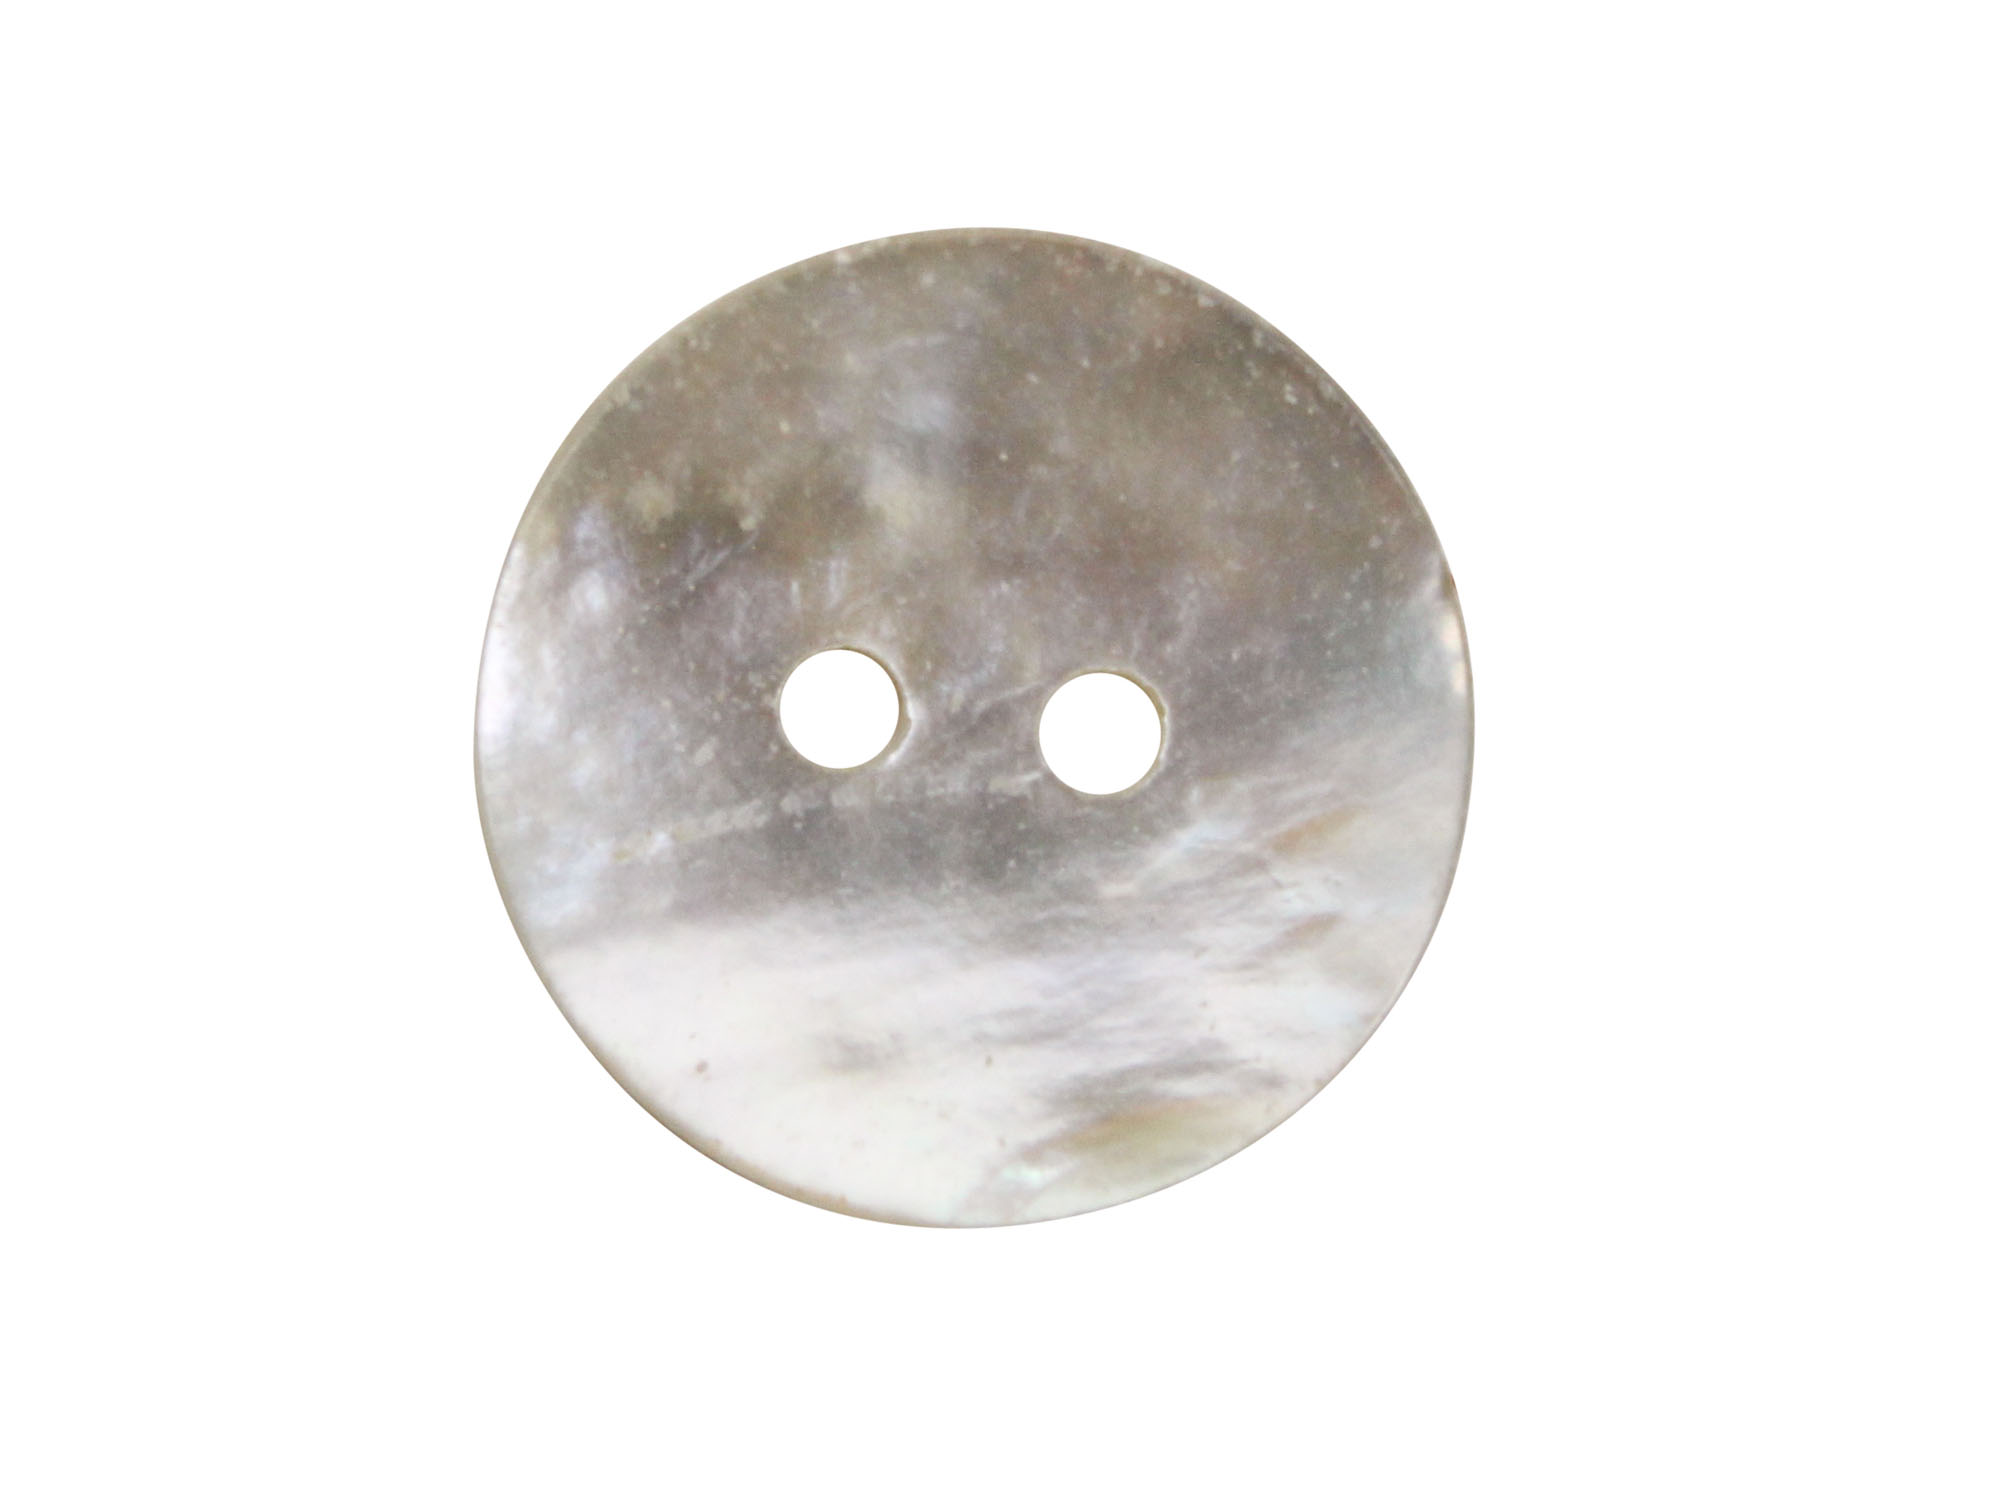 Akoya Mother of Pearl Button: 24L (15mm or 0.59") mother-of-pearl buttons